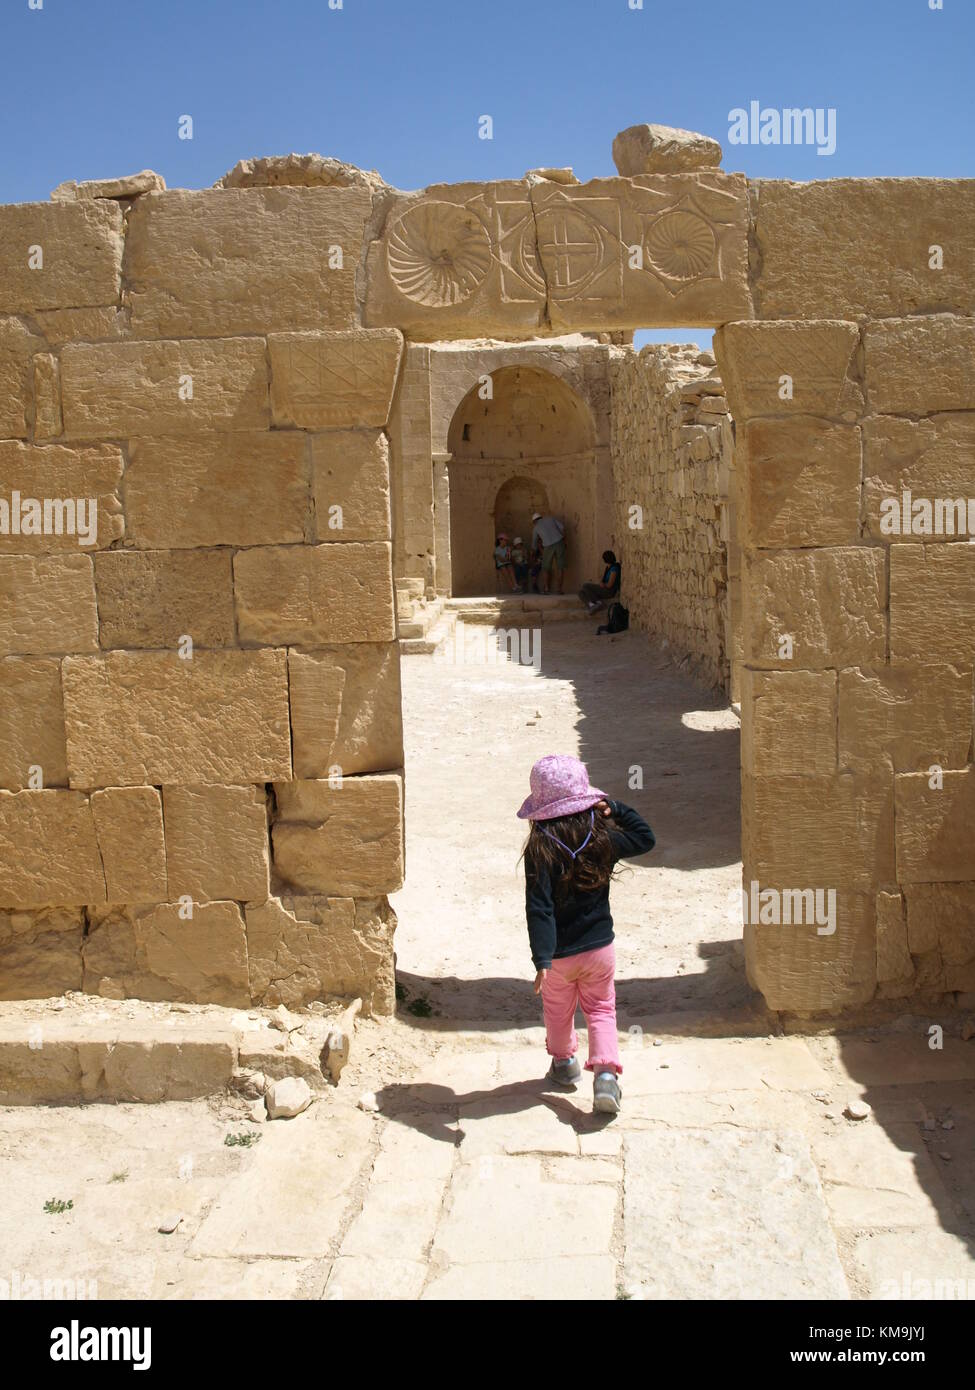 a child at the doorway is entering an Ancient city remains Stock Photo